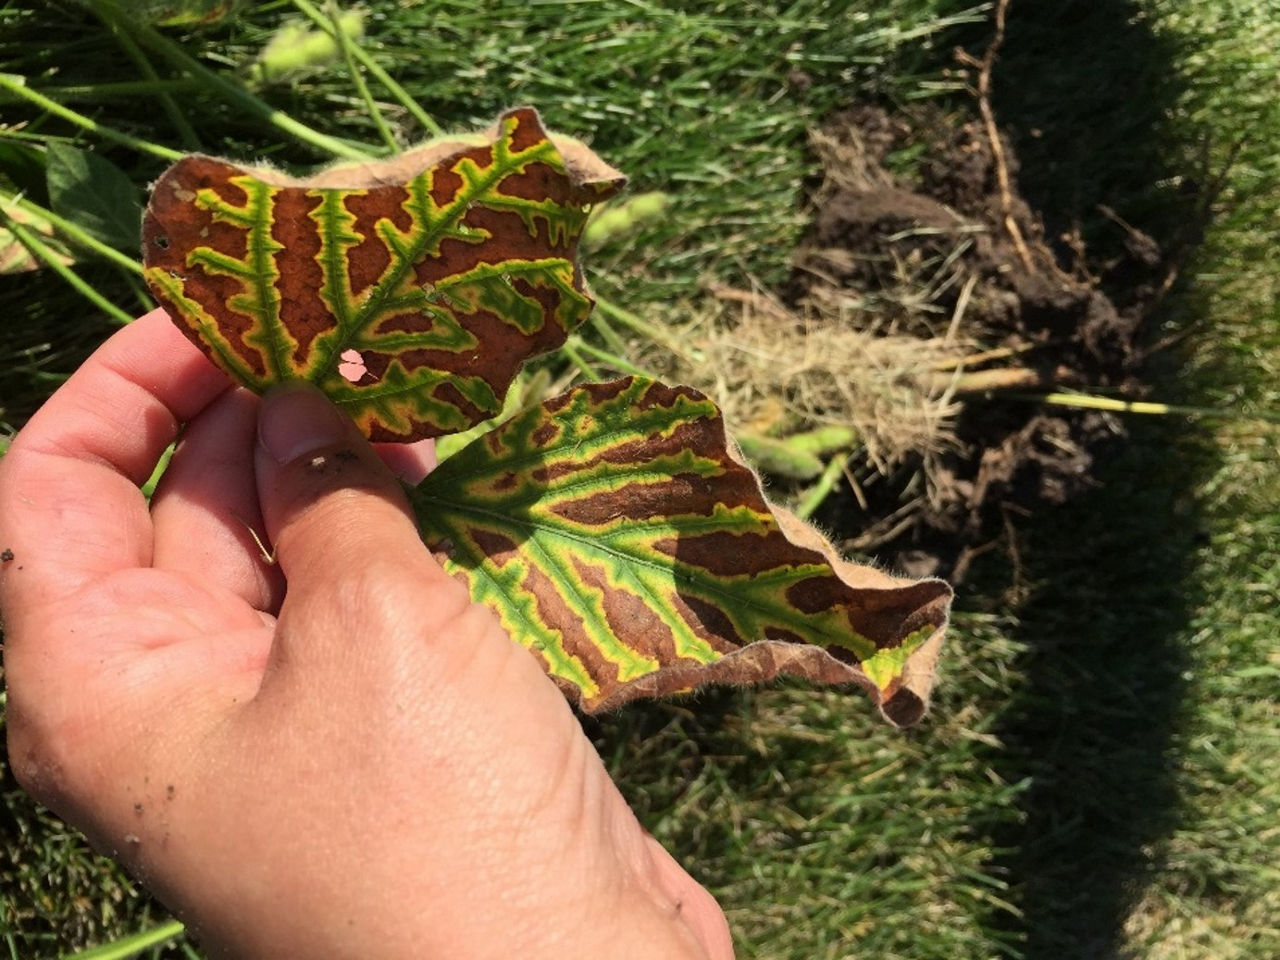 Sudden Death Syndrome (SDS) in soybean images